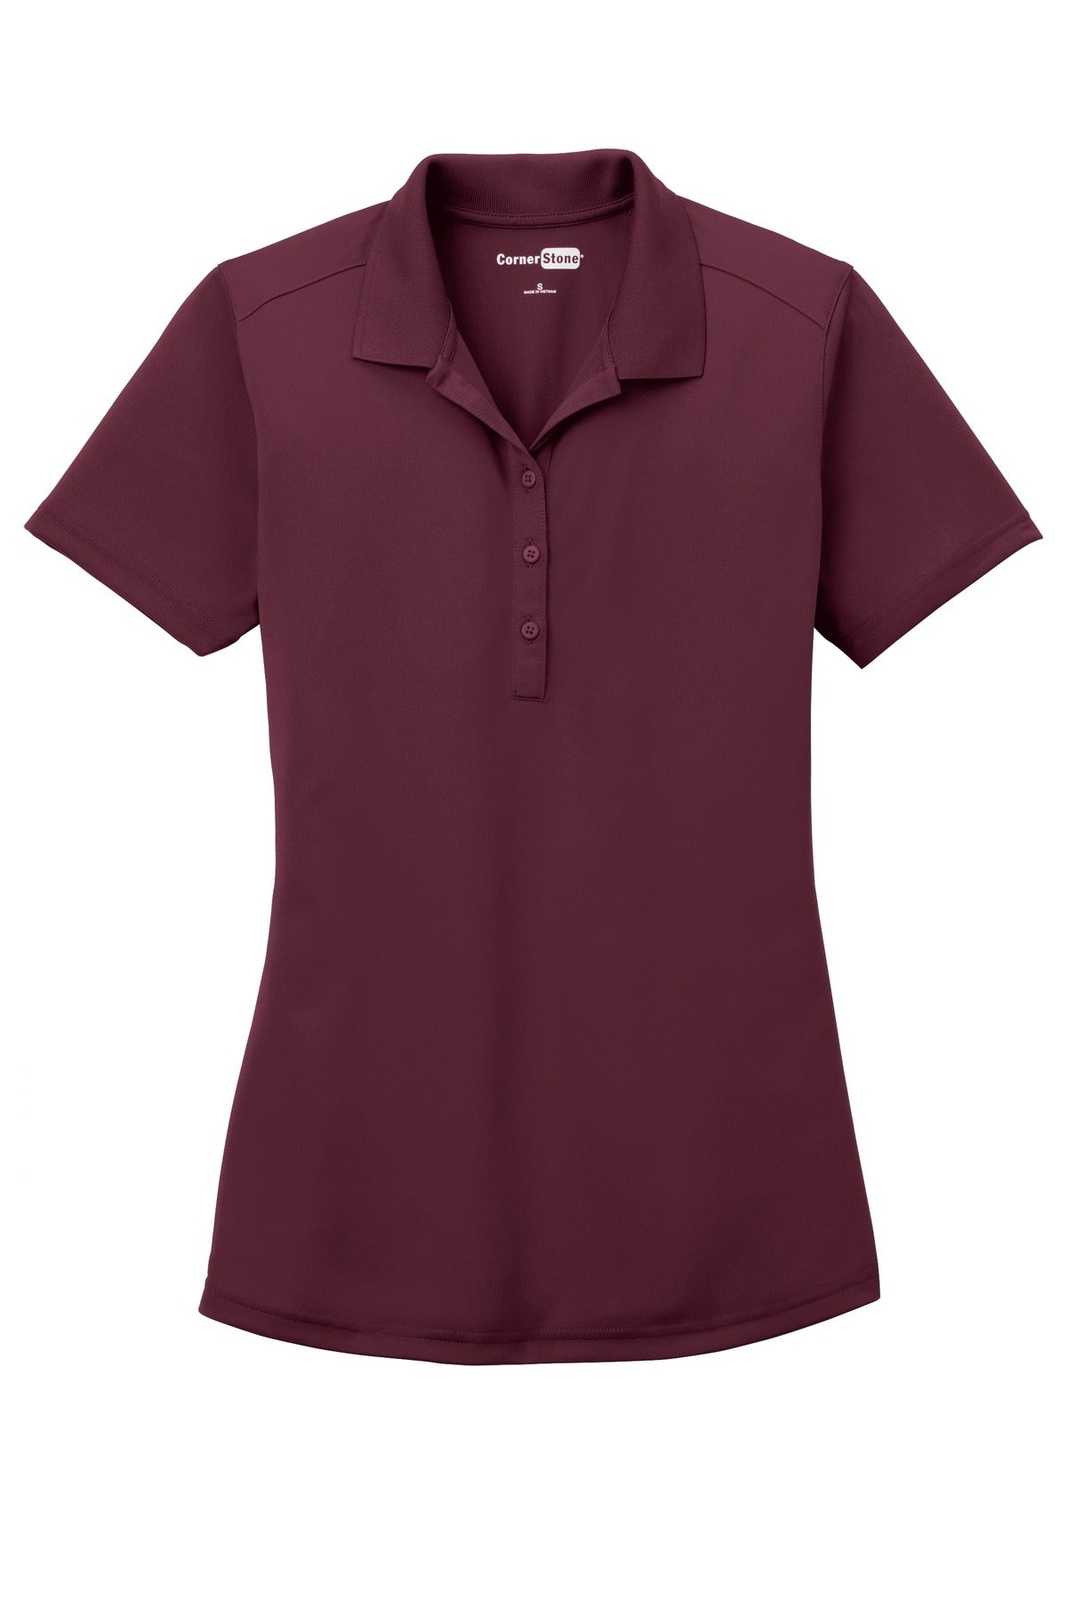 CornerStone CS419 Ladies Select Lightweight Snag-Proof Polo - Maroon - HIT a Double - 5